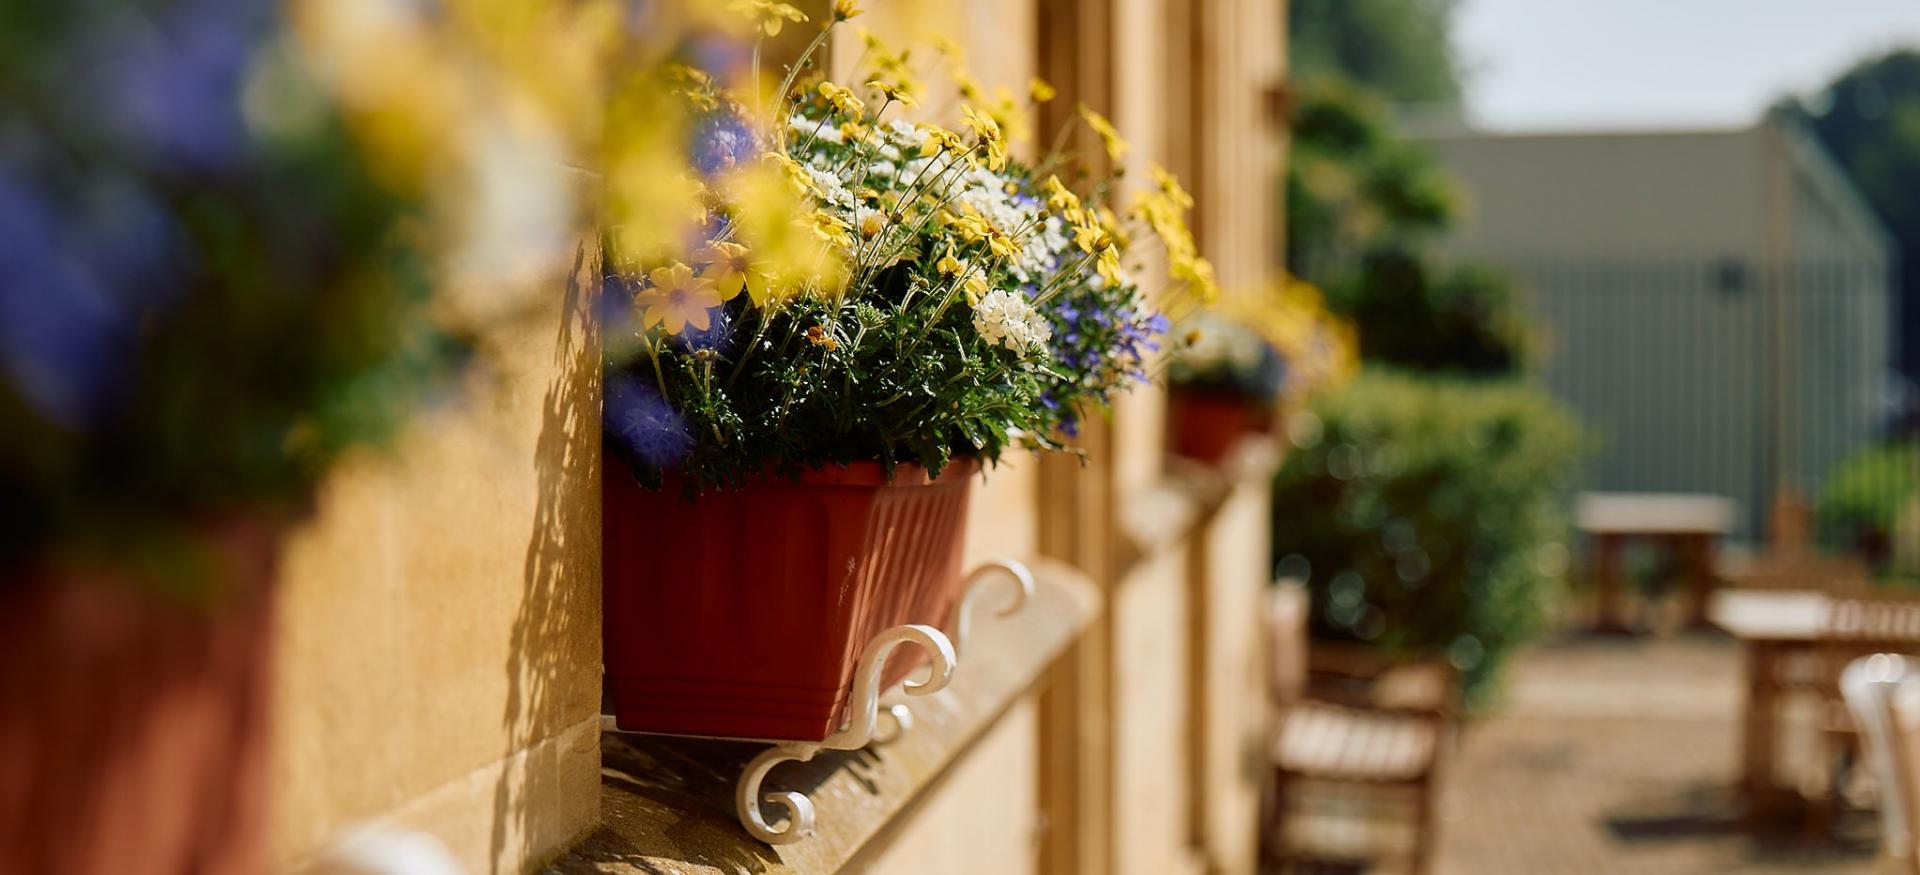 Image of a row of window boxes in Trinity college's garden quad.